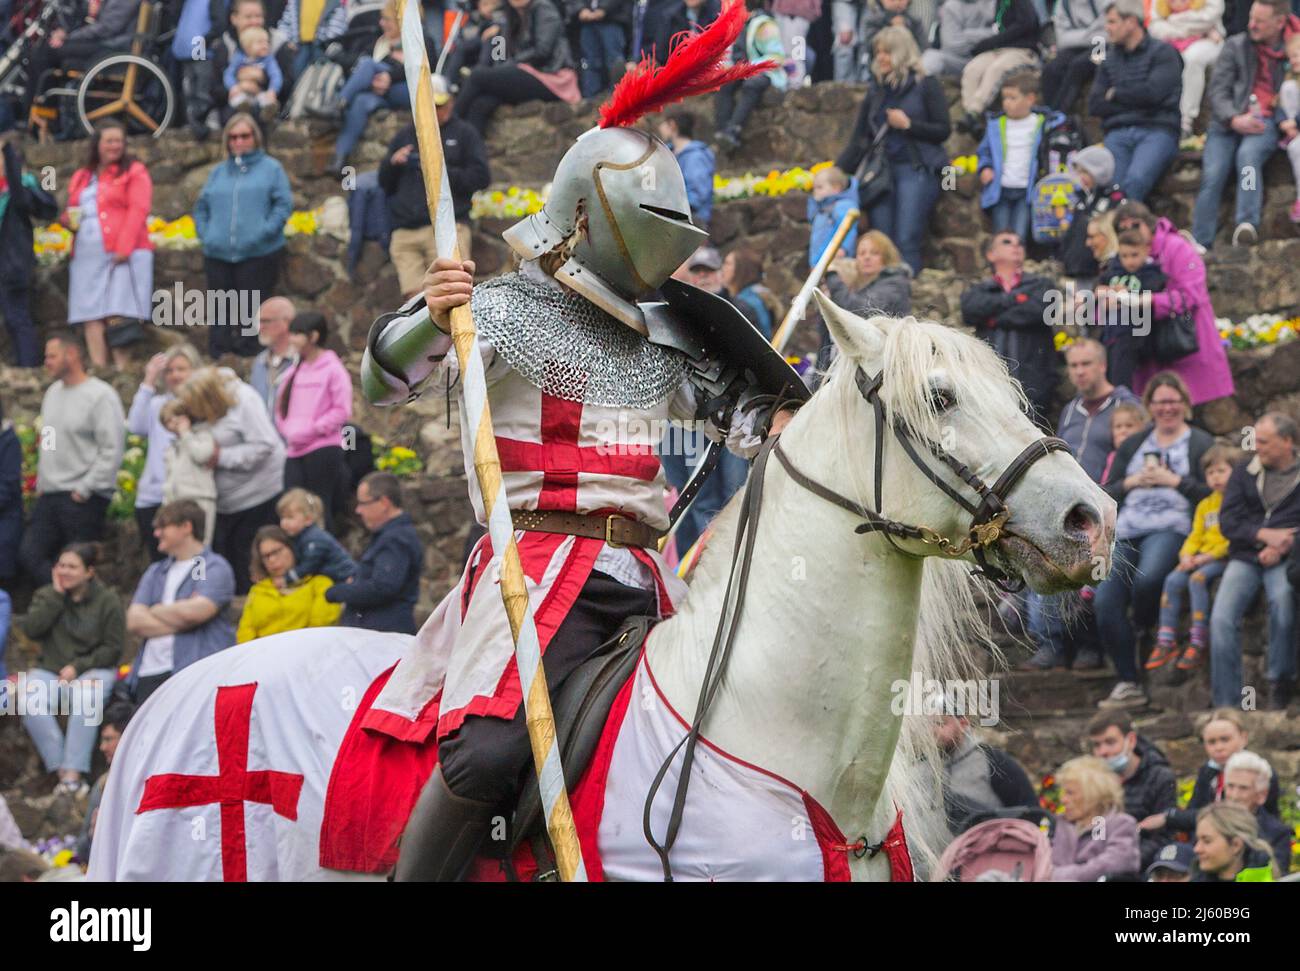 A knight on horseback carries a jousting pole while wearing body armour during The Grand Medieval Joust at Tamworth Castle on St. George's day. Stock Photo